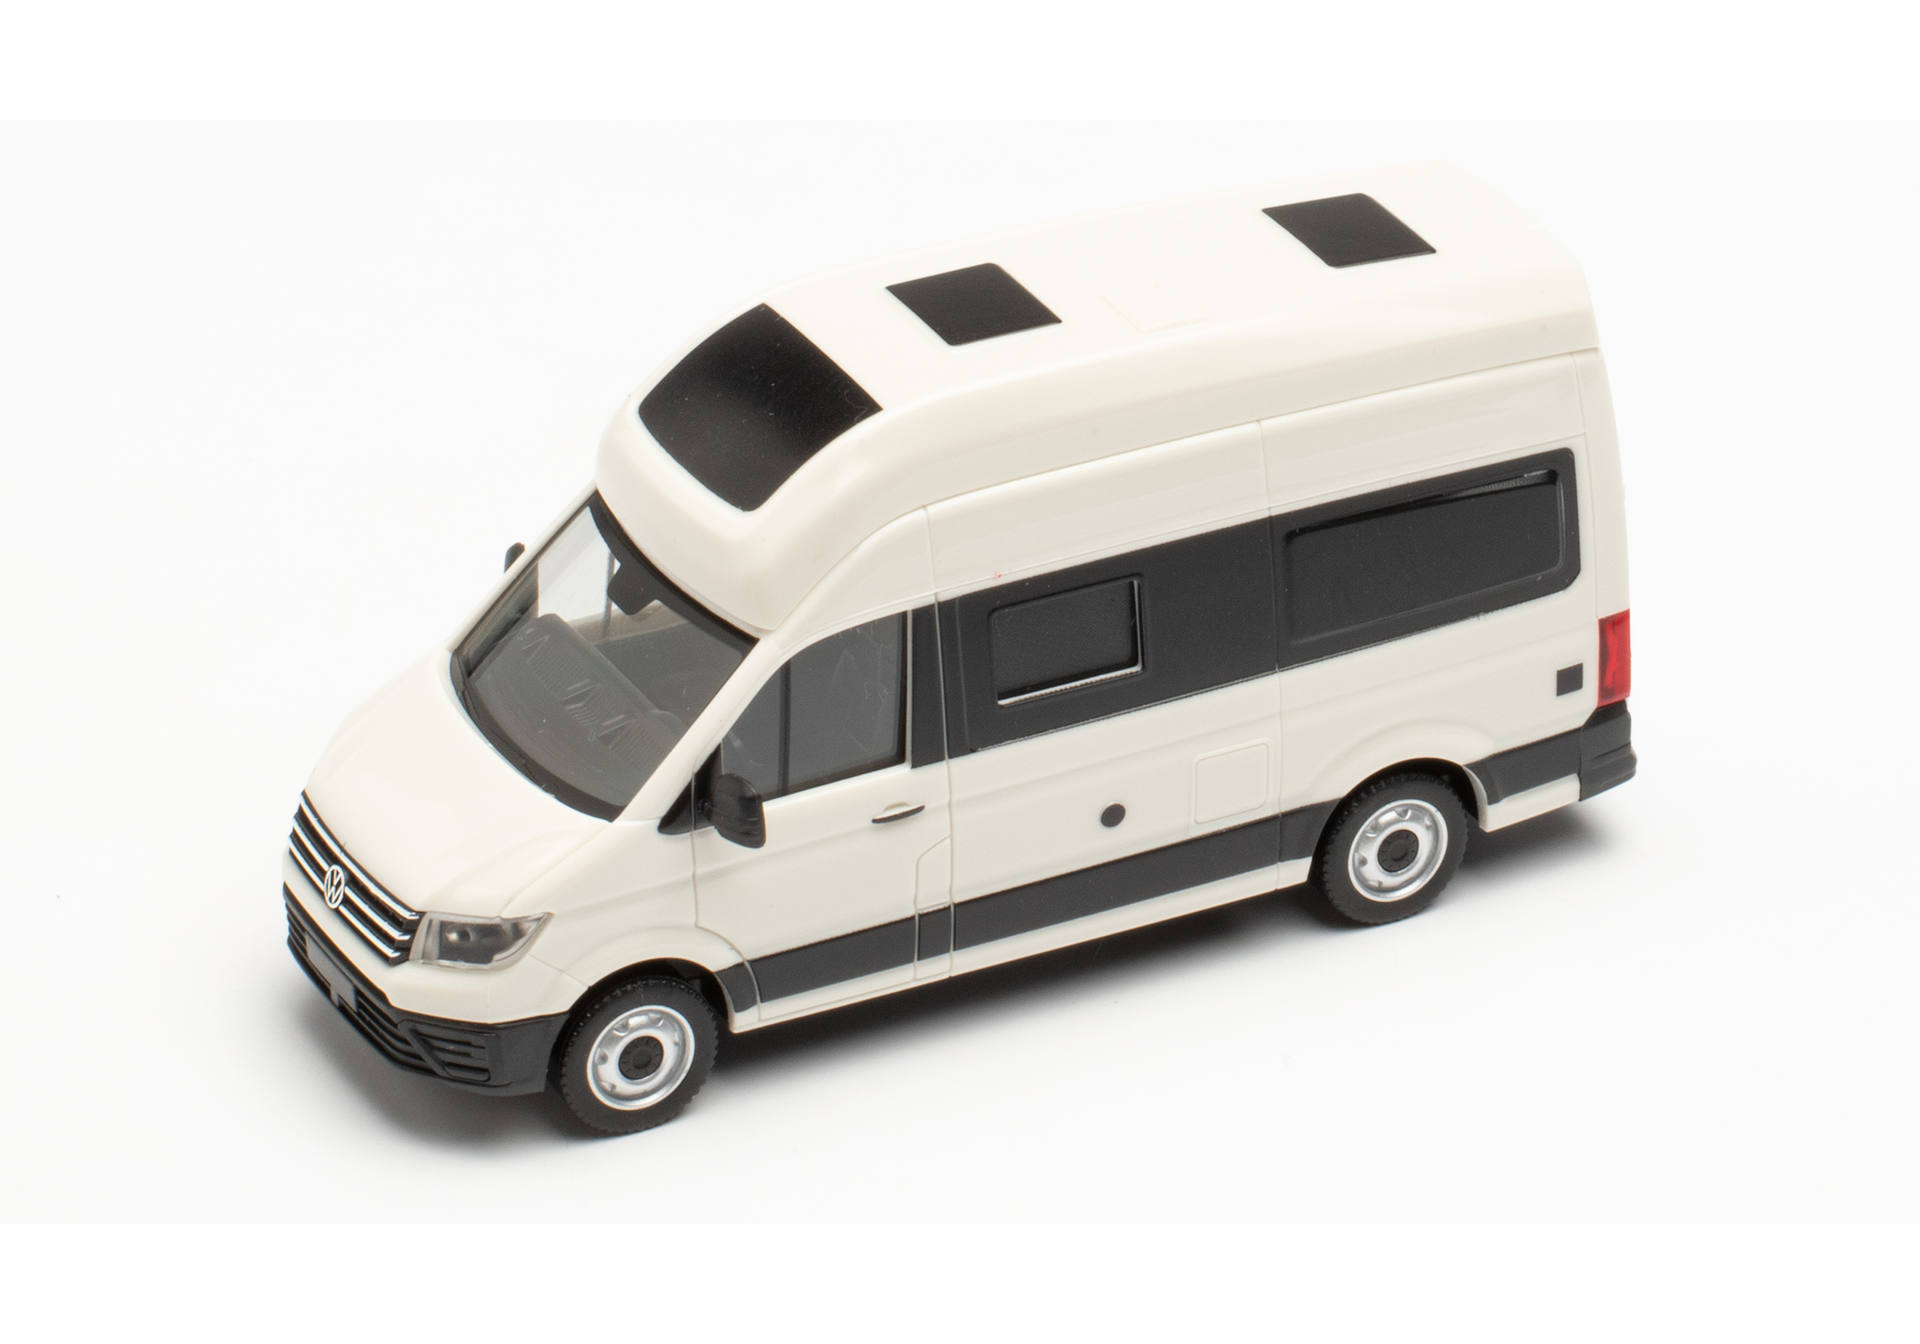 Volkswagen Crafter Grand California 600, candy white